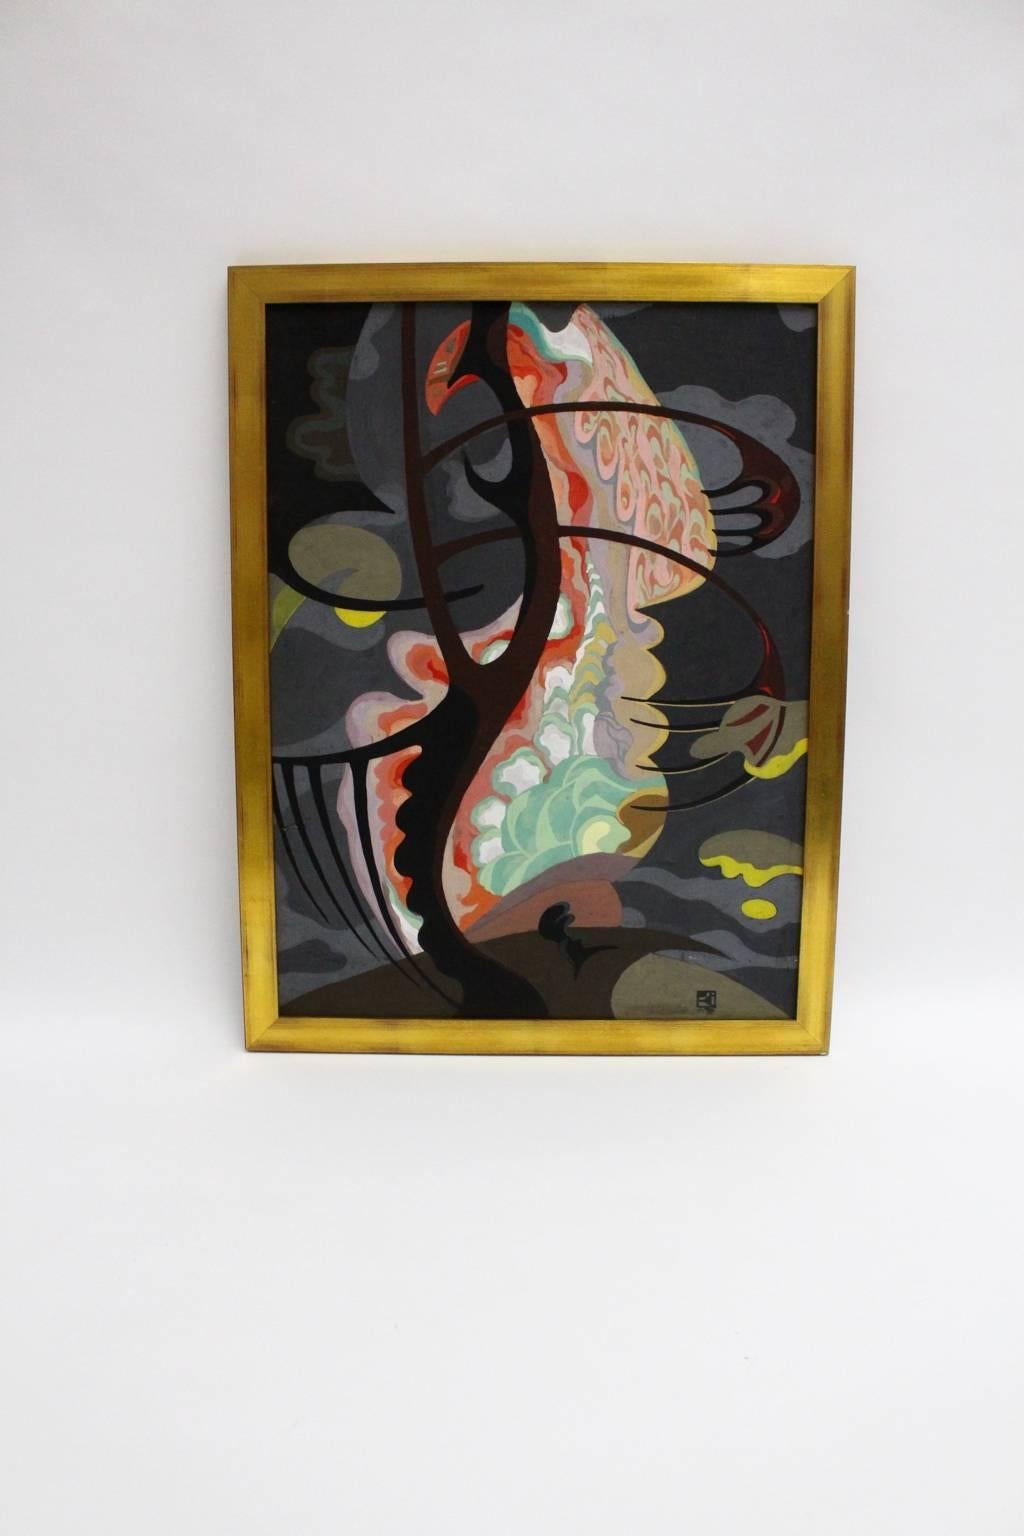 Mid-Century Modern Surrealistic Vintage Painting by Erwin Stolz, 1953, Czech Republic For Sale